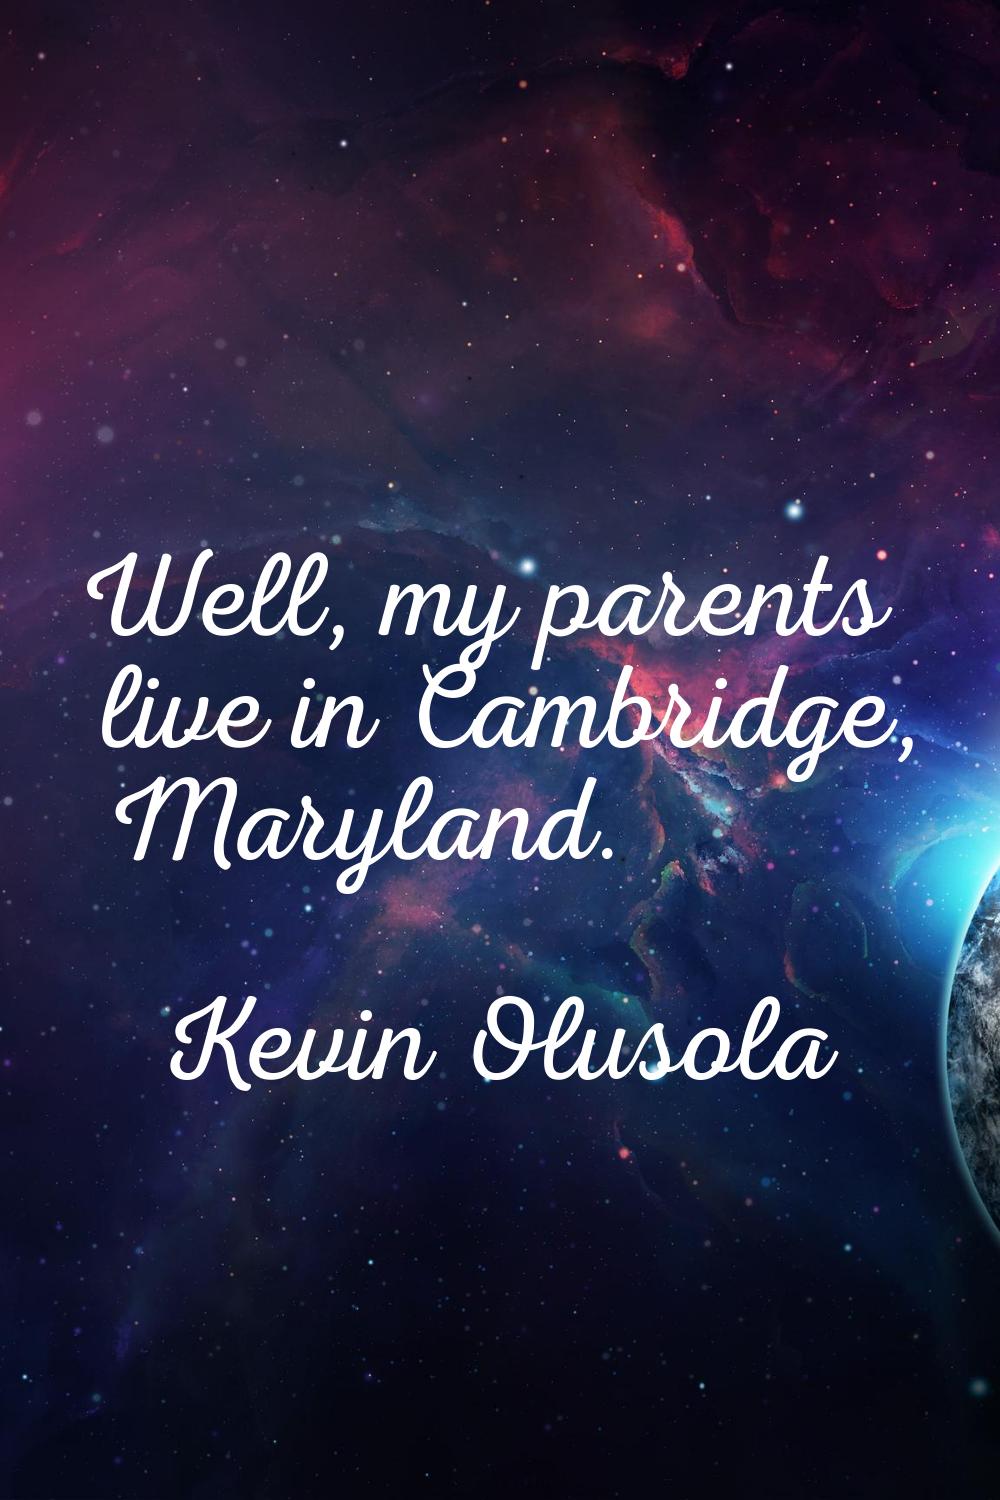 Well, my parents live in Cambridge, Maryland.